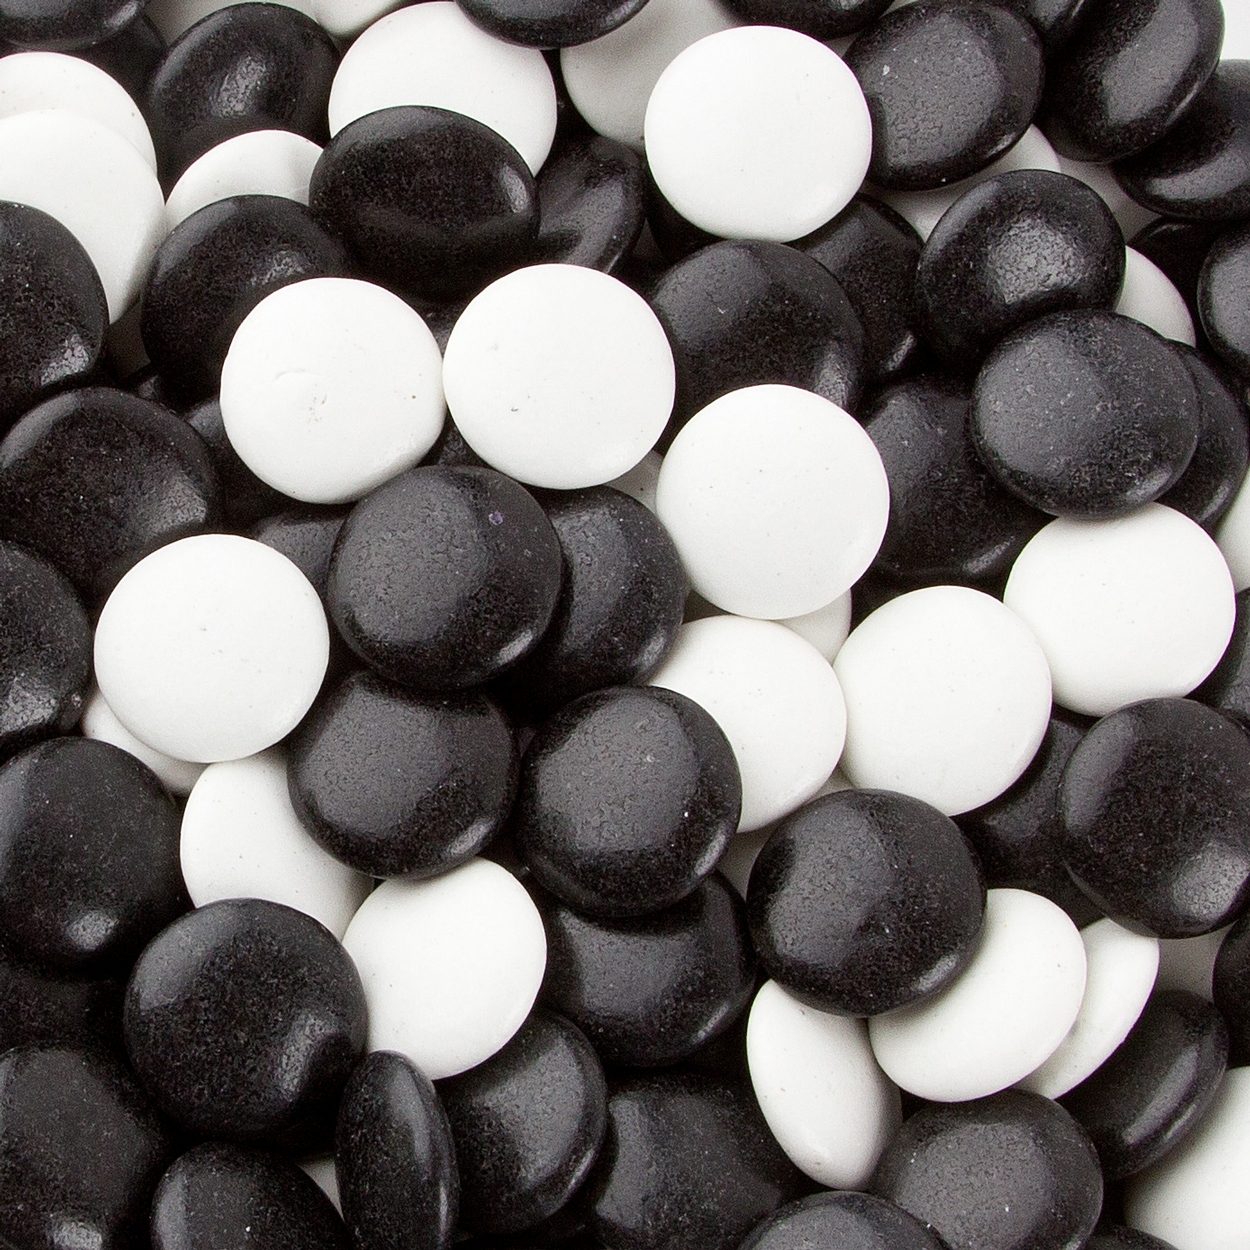 Black & White Mint Chocolate Lentils • Chocolate Candy Buttons & Lentils •  Bulk Candy • Oh! Nuts®